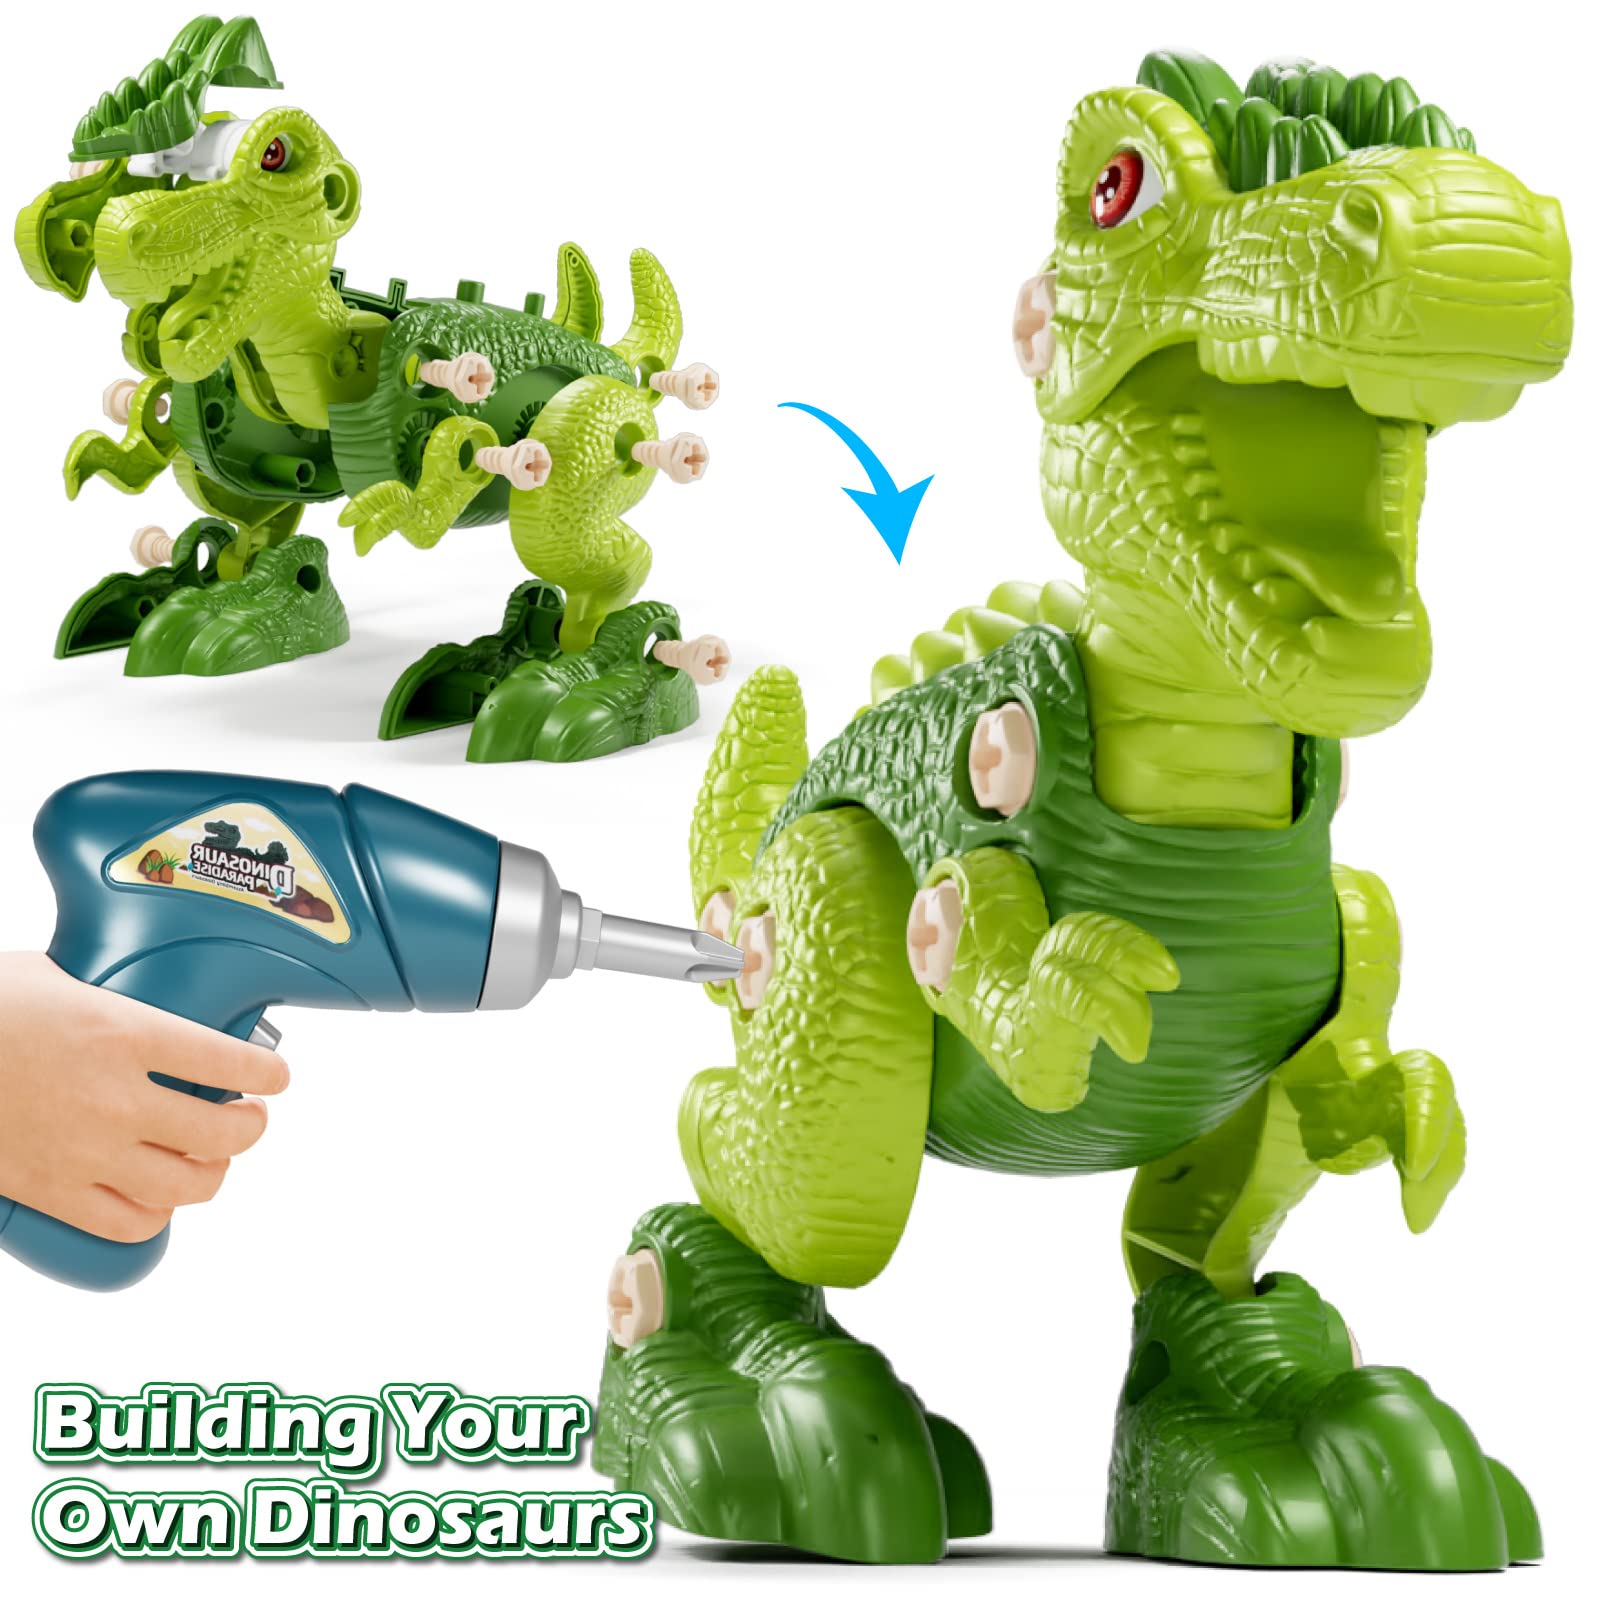 Jasonwell Kids Building Dinosaur Toys - Boys STEM Educational Take Apart Construction Set Learning Kit Creative Activities Games Birthday Gifts for Toddlers Girls Age 3 4 5 6 7 8 Years Old (3PCS)